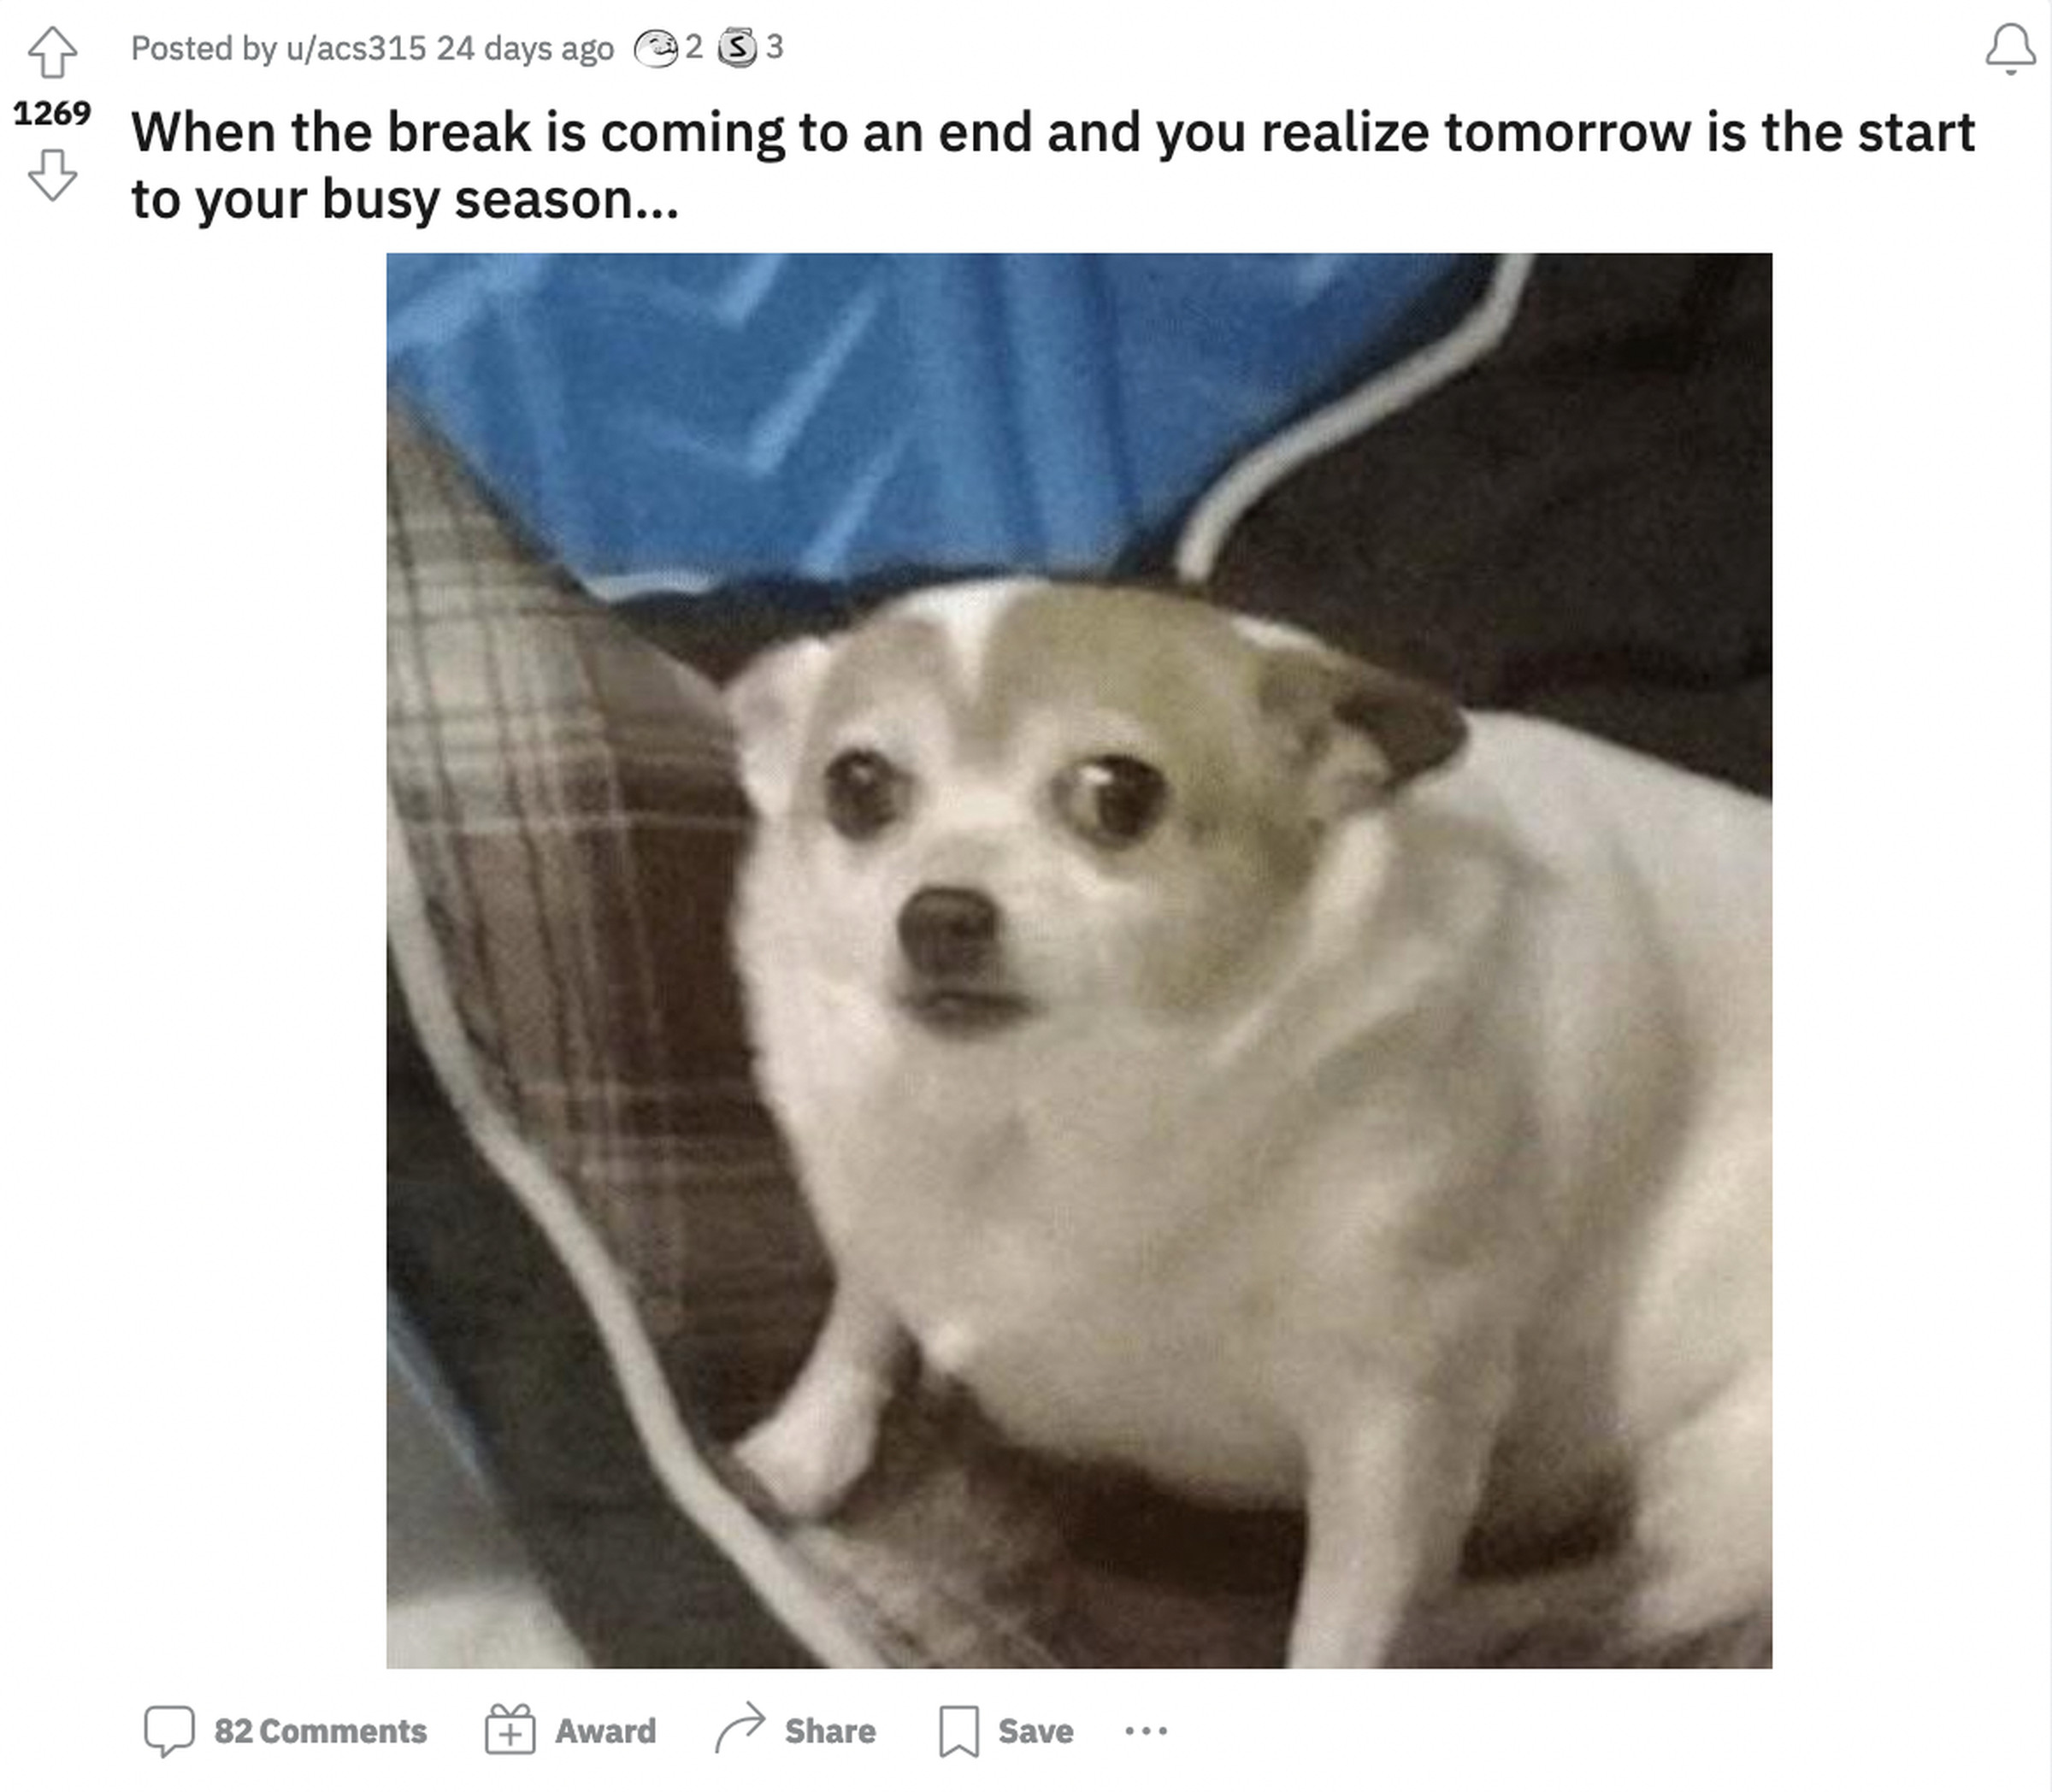 A picture of a frightened-looking dog captioned “When the break is coming to an end and you realize tomorrow is the start to your busy season… “